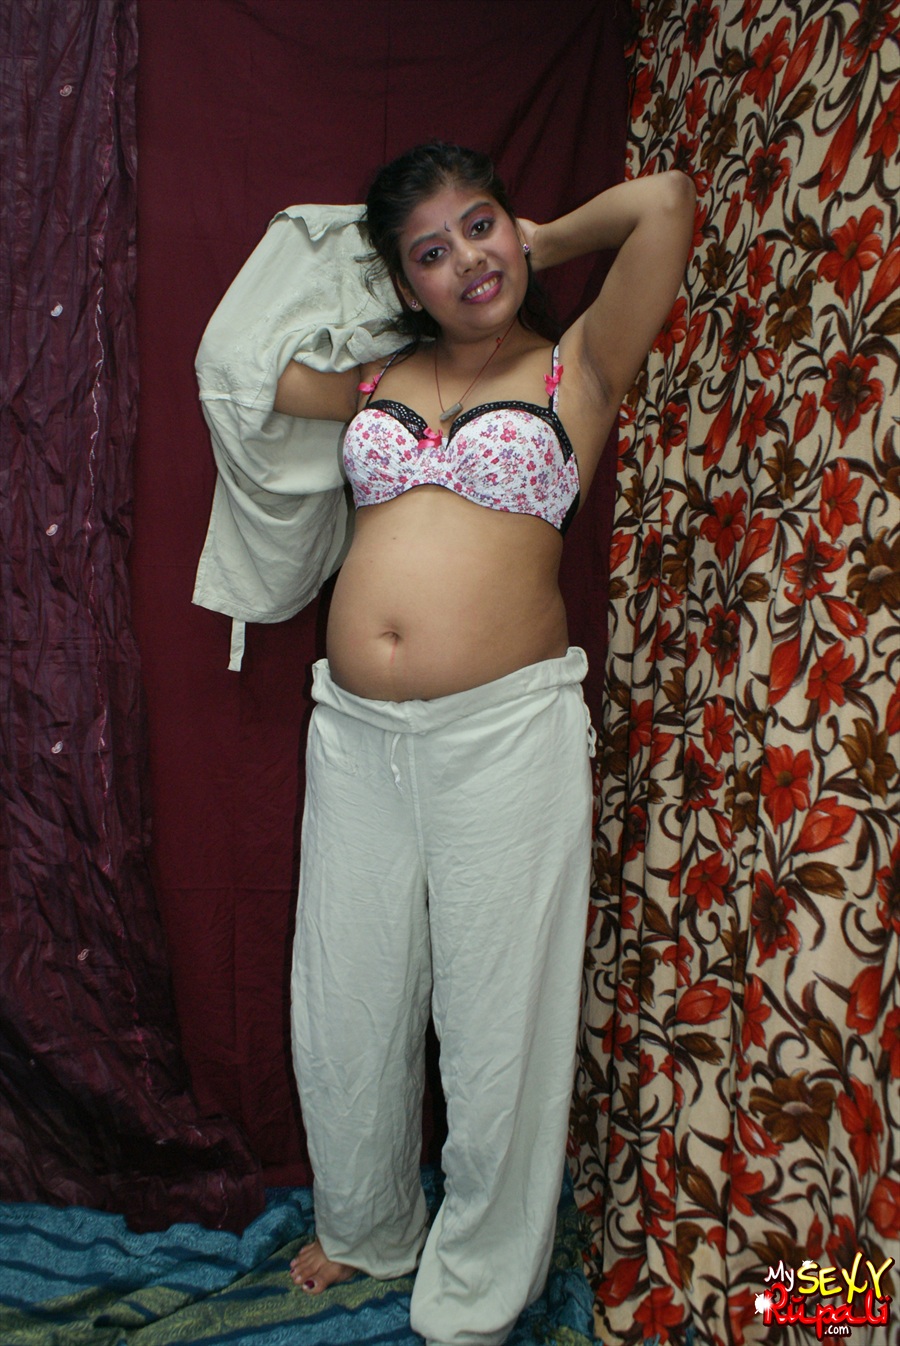 Iab picture gallery 27. Rupali bhabhi in her night suit